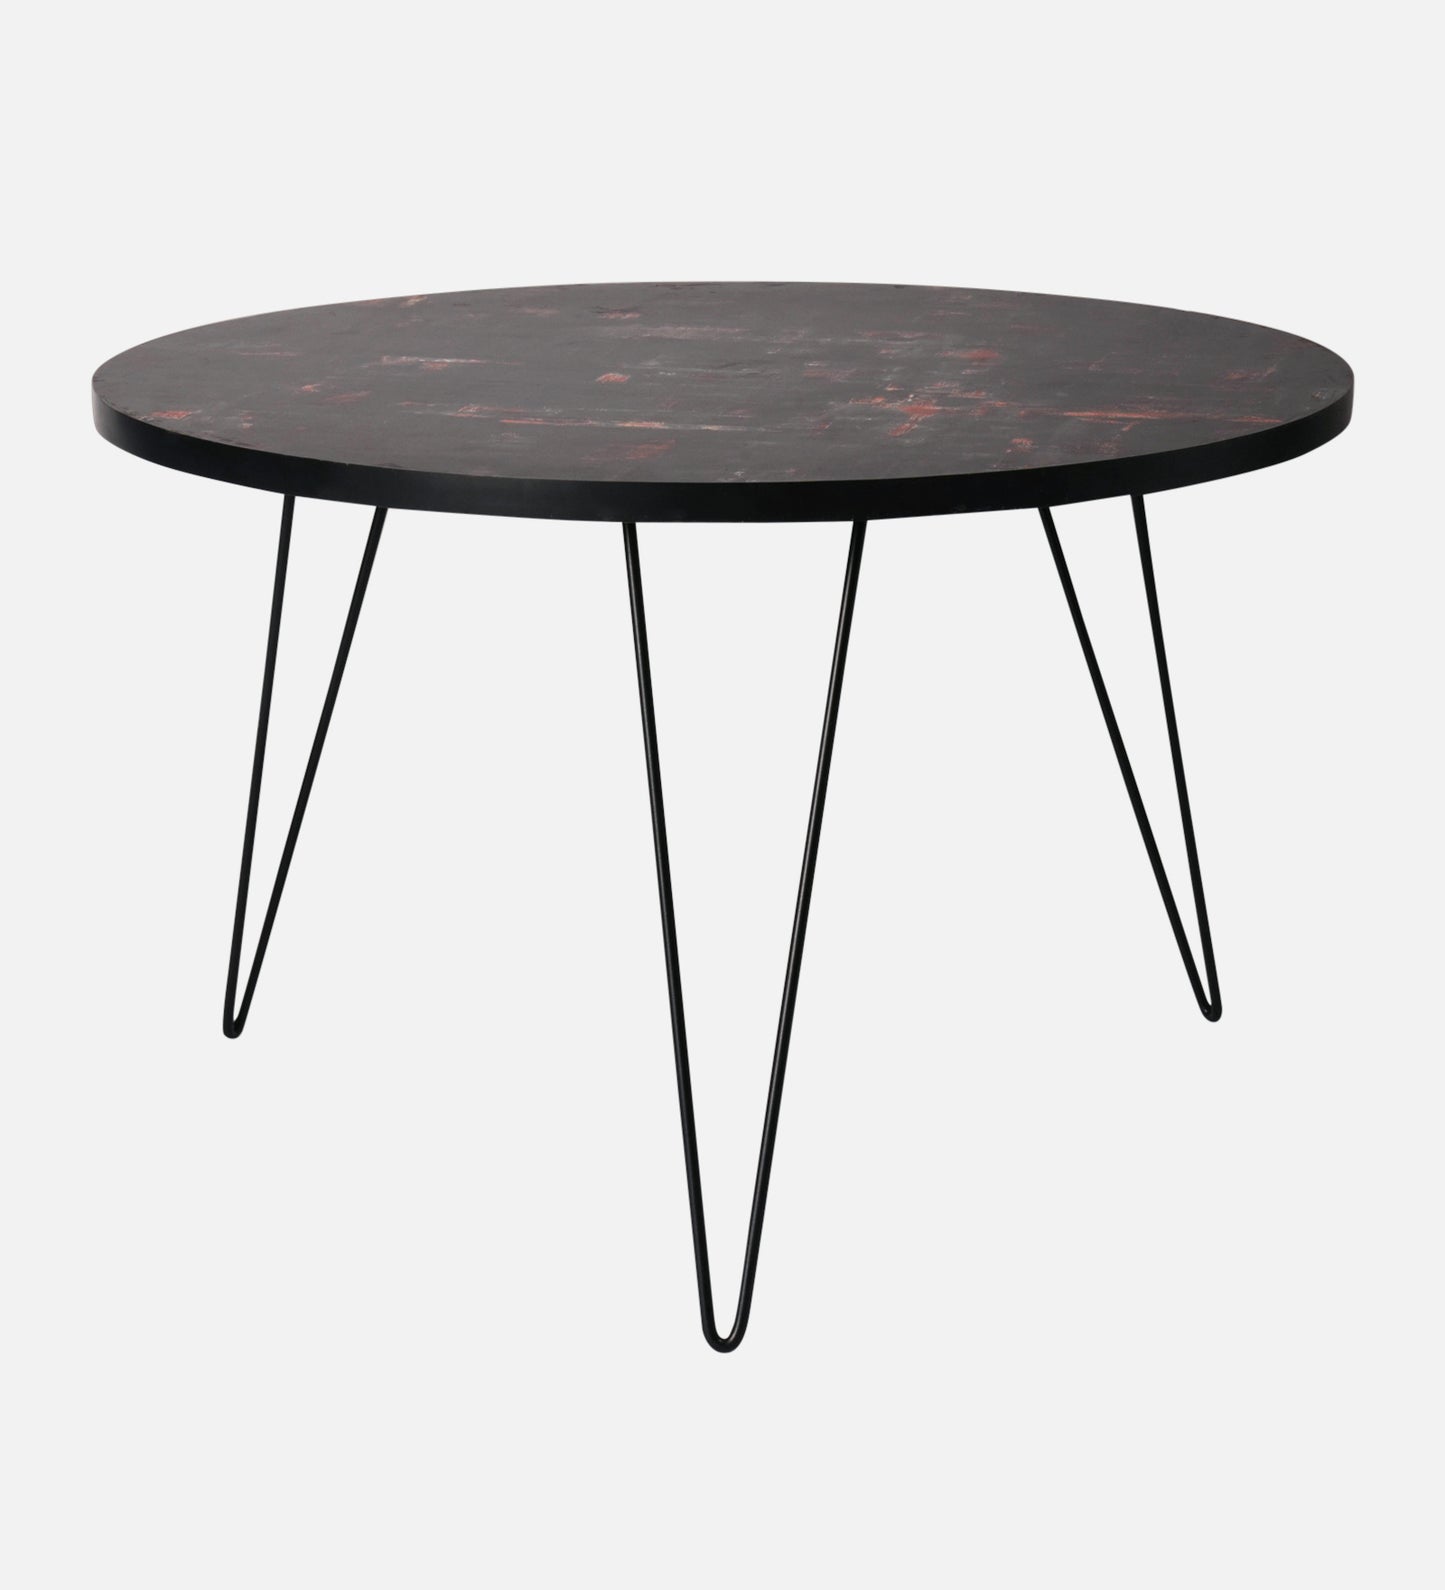 Dusk Round Coffee Tables, Wooden Tables, Coffee Tables, Center Tables, Living Room Decor by A Tiny Mistake